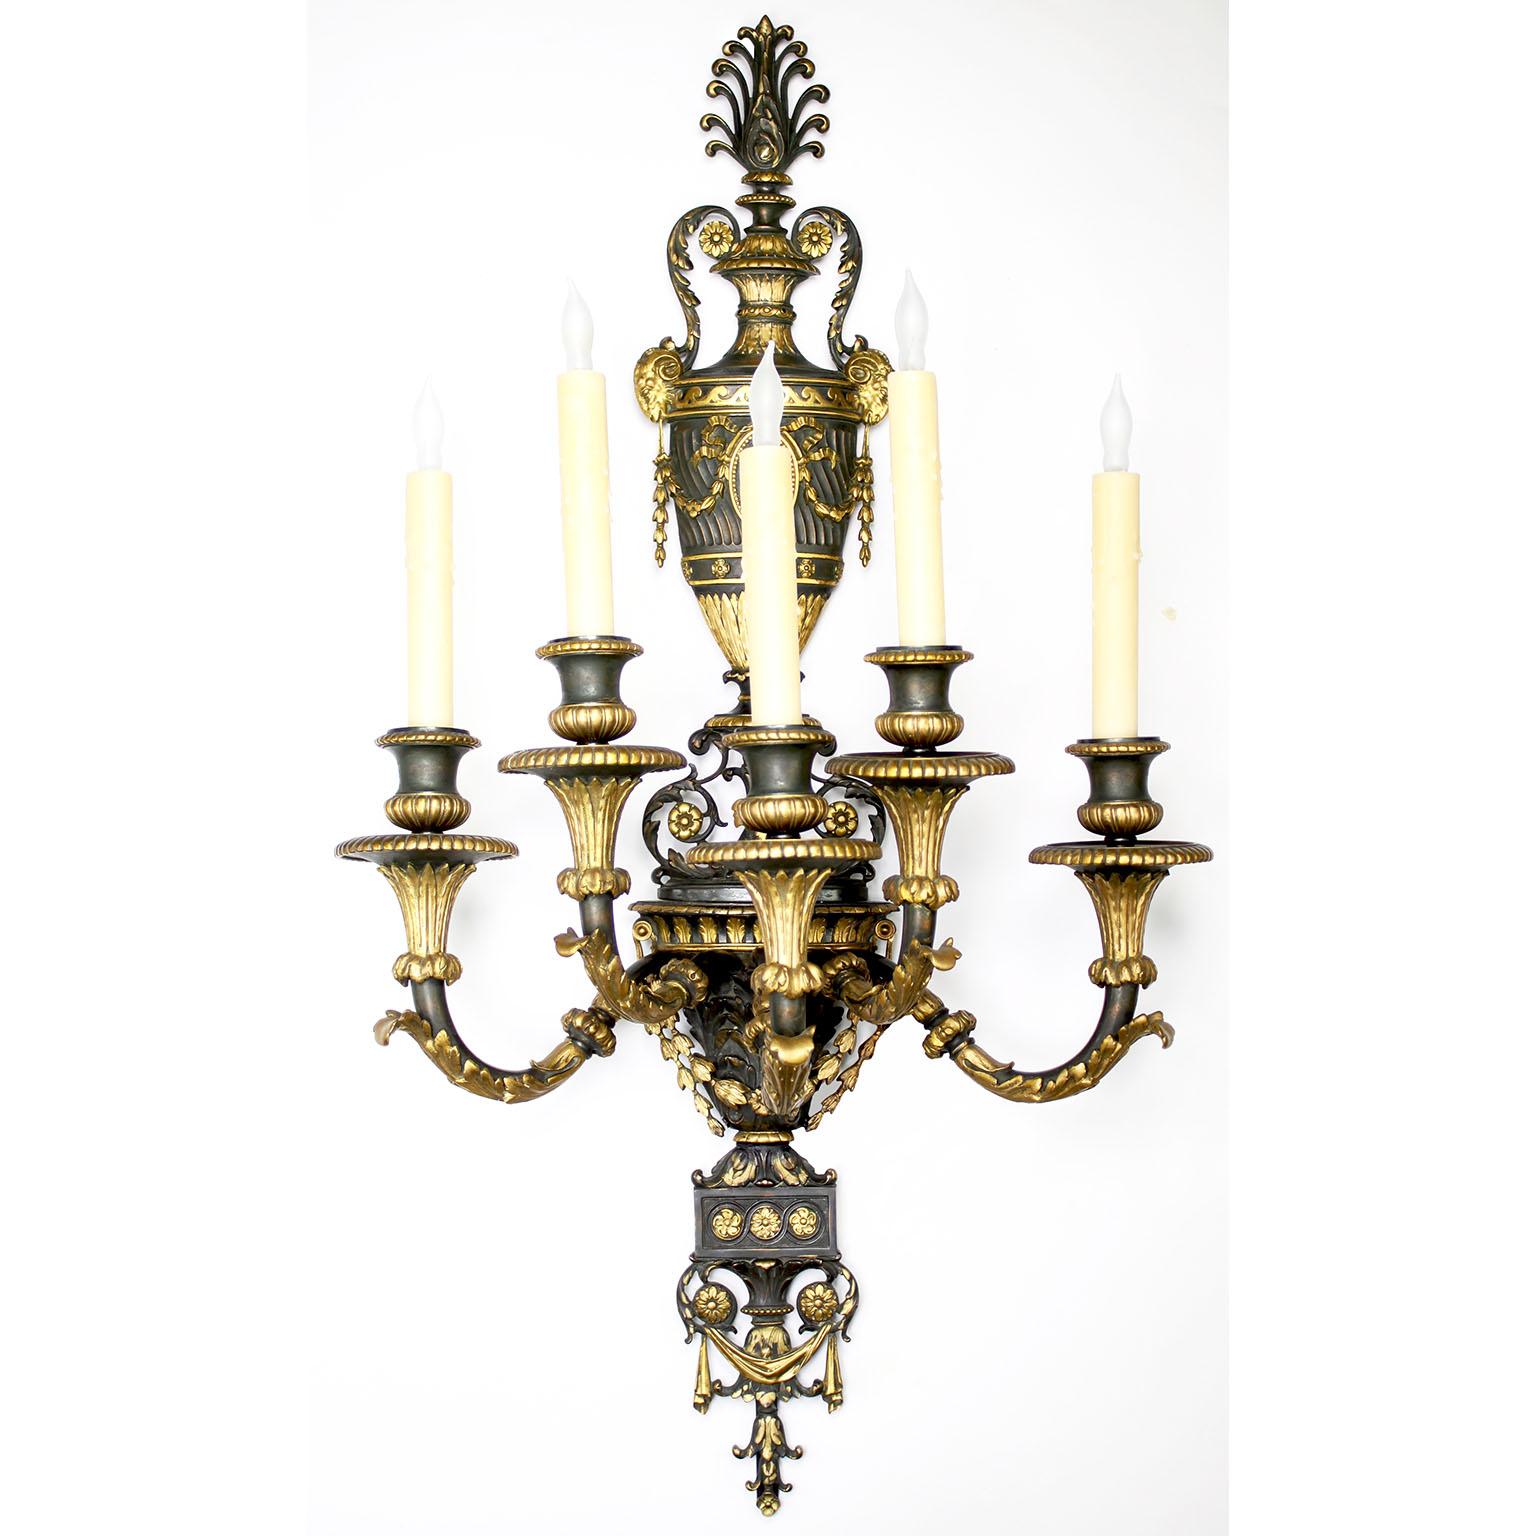 A very fine Pair of French, 19th Century Empire-Neoclassical style parcel-gilt and patinated bronze five-light wall lights (Sconces). The elongated dark patinated two-tone frames, each surmounted with a classical urn back-plate with floral wreaths